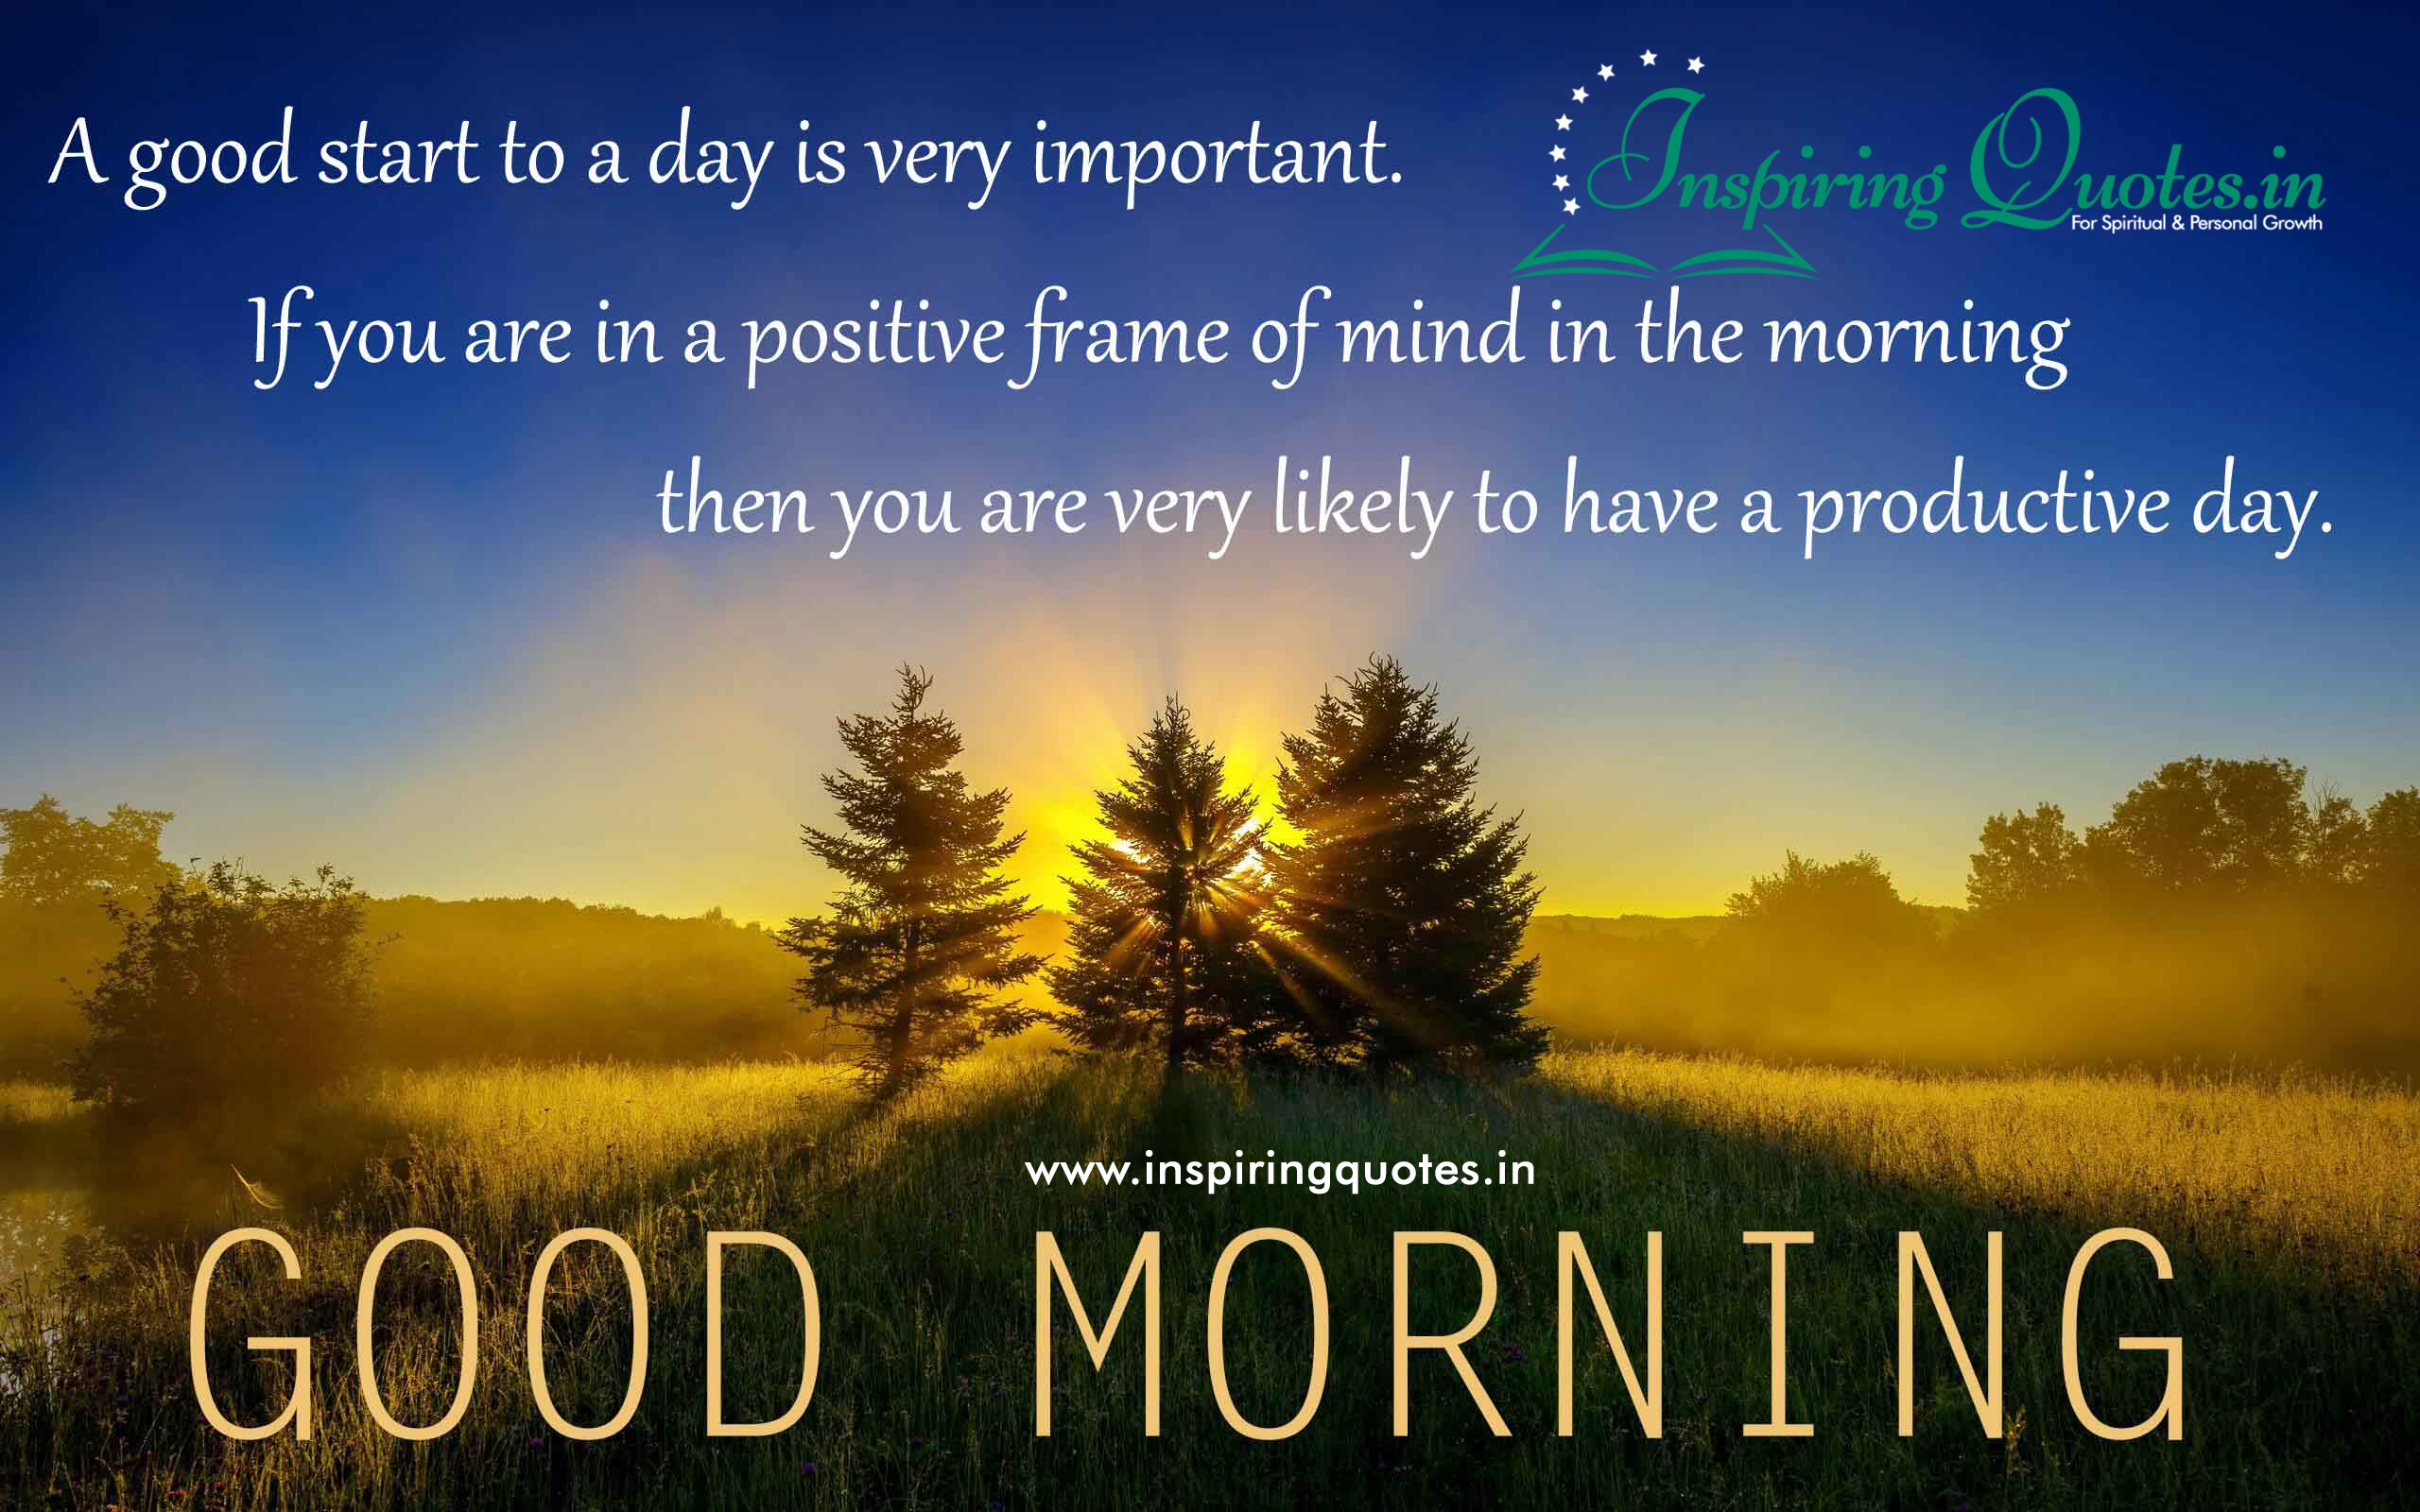 Good Morning Lines For Good Start to a Day - Inspiring Quotes